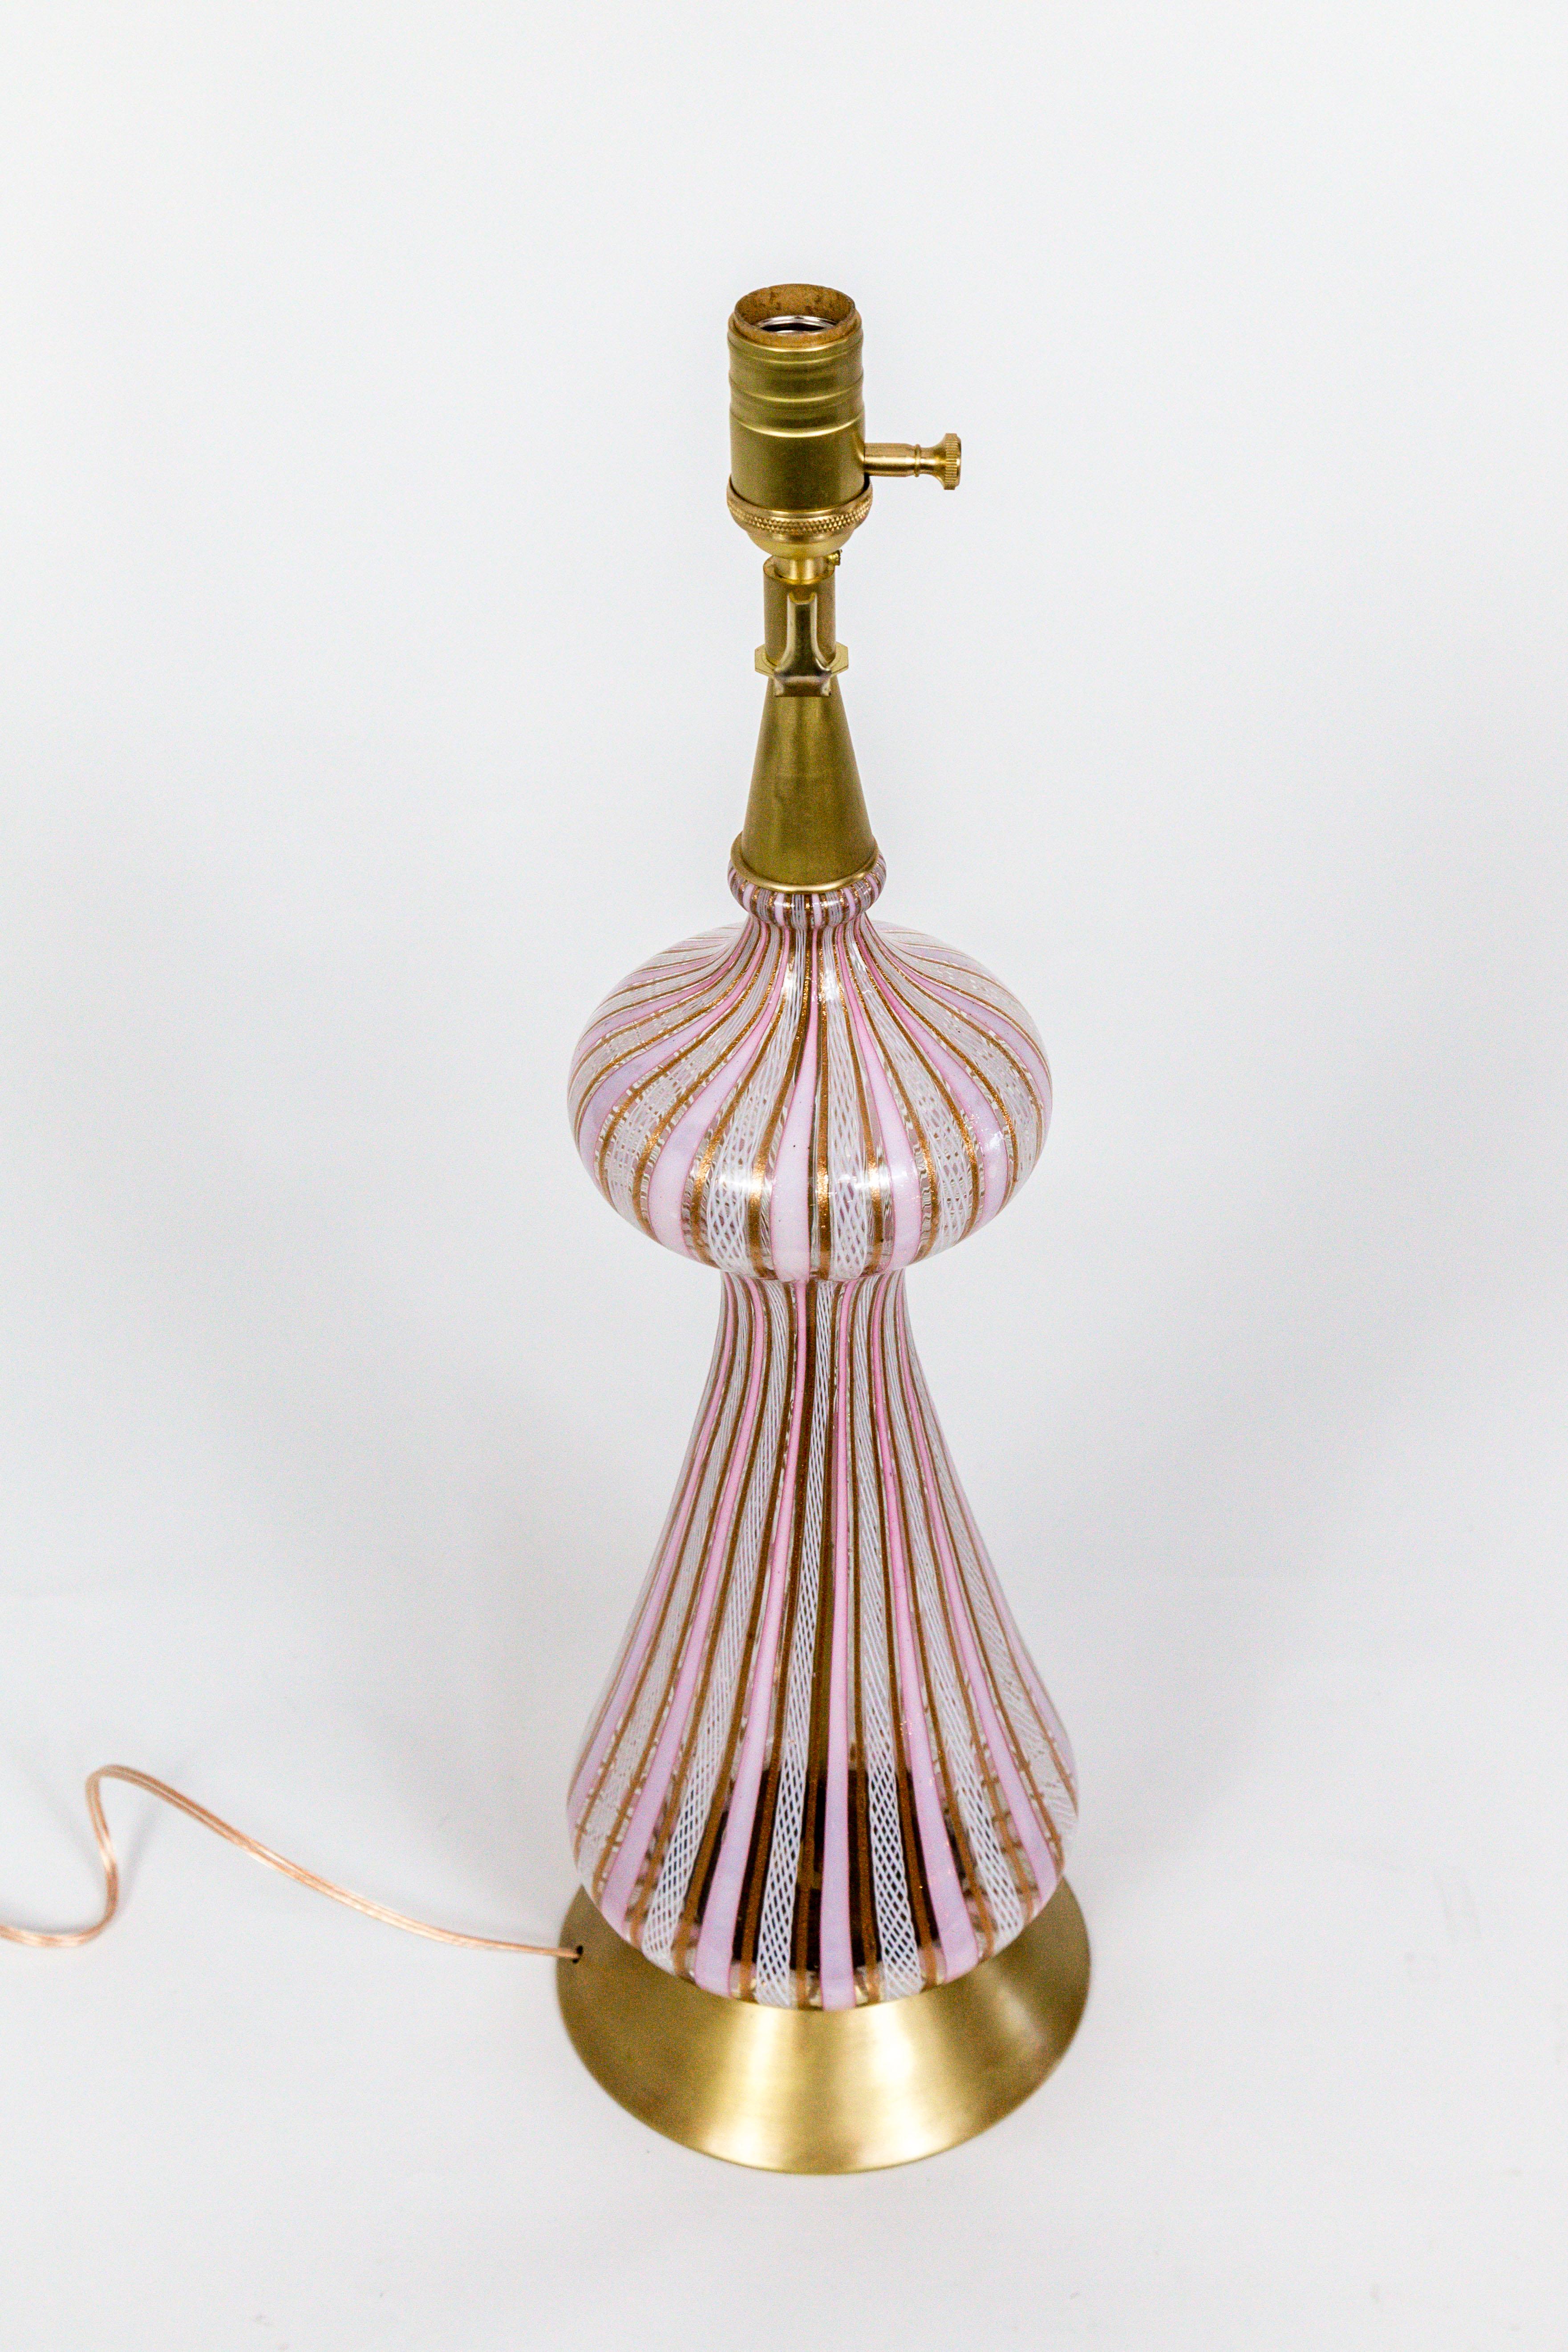 A sensuous, baluster shape, Venetian glass lamp; with pink and 